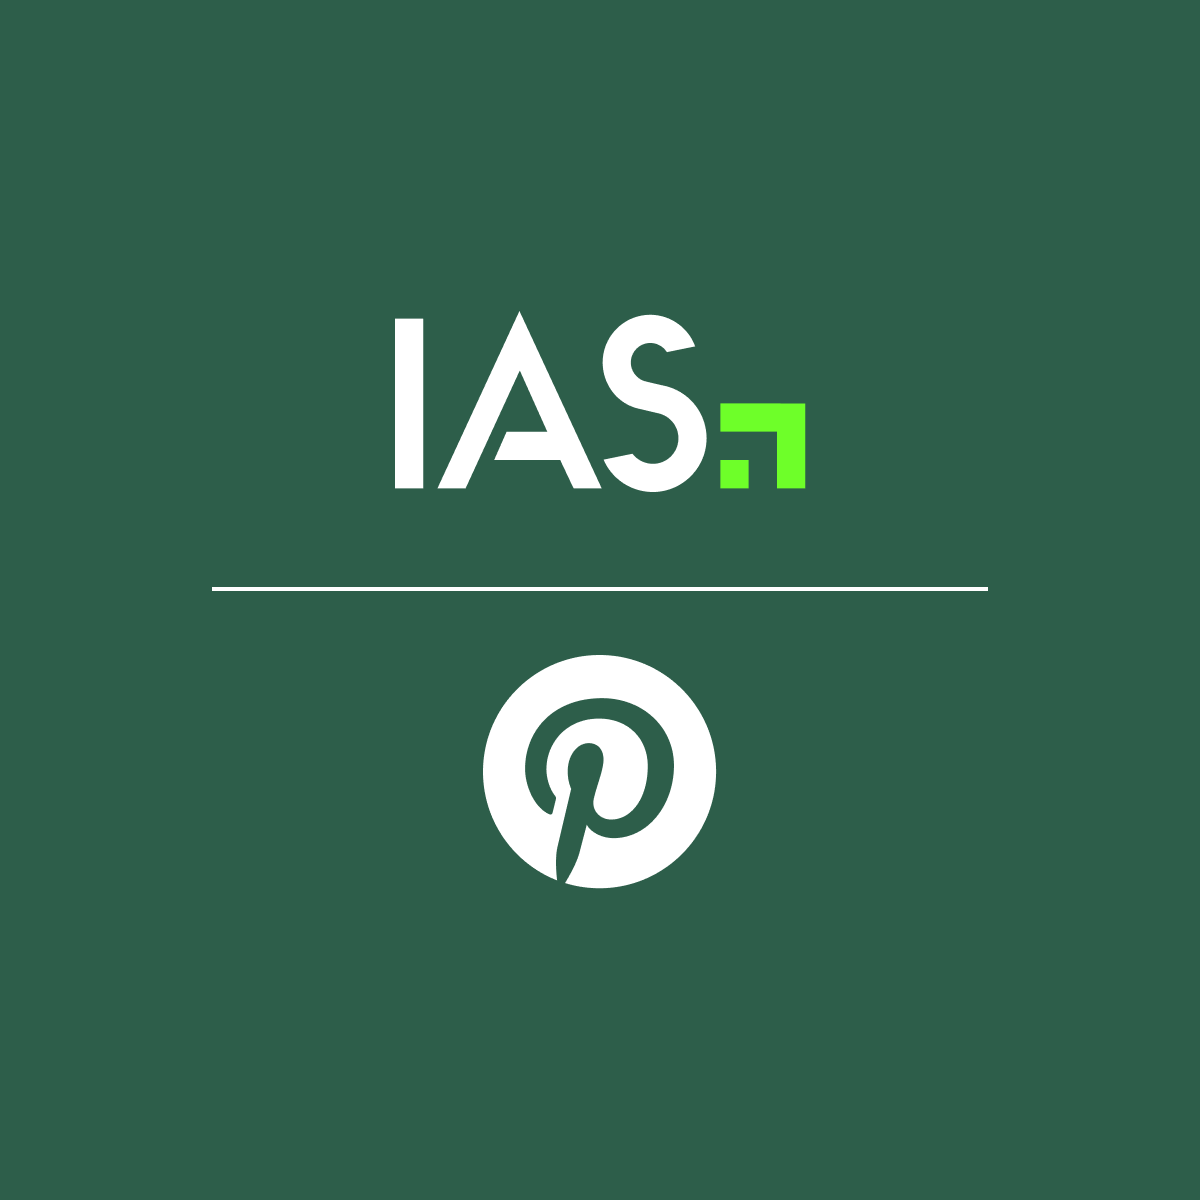 IAS Announces Partnership With Pinterest to Provide AI-Driven Brand Safety Measurement